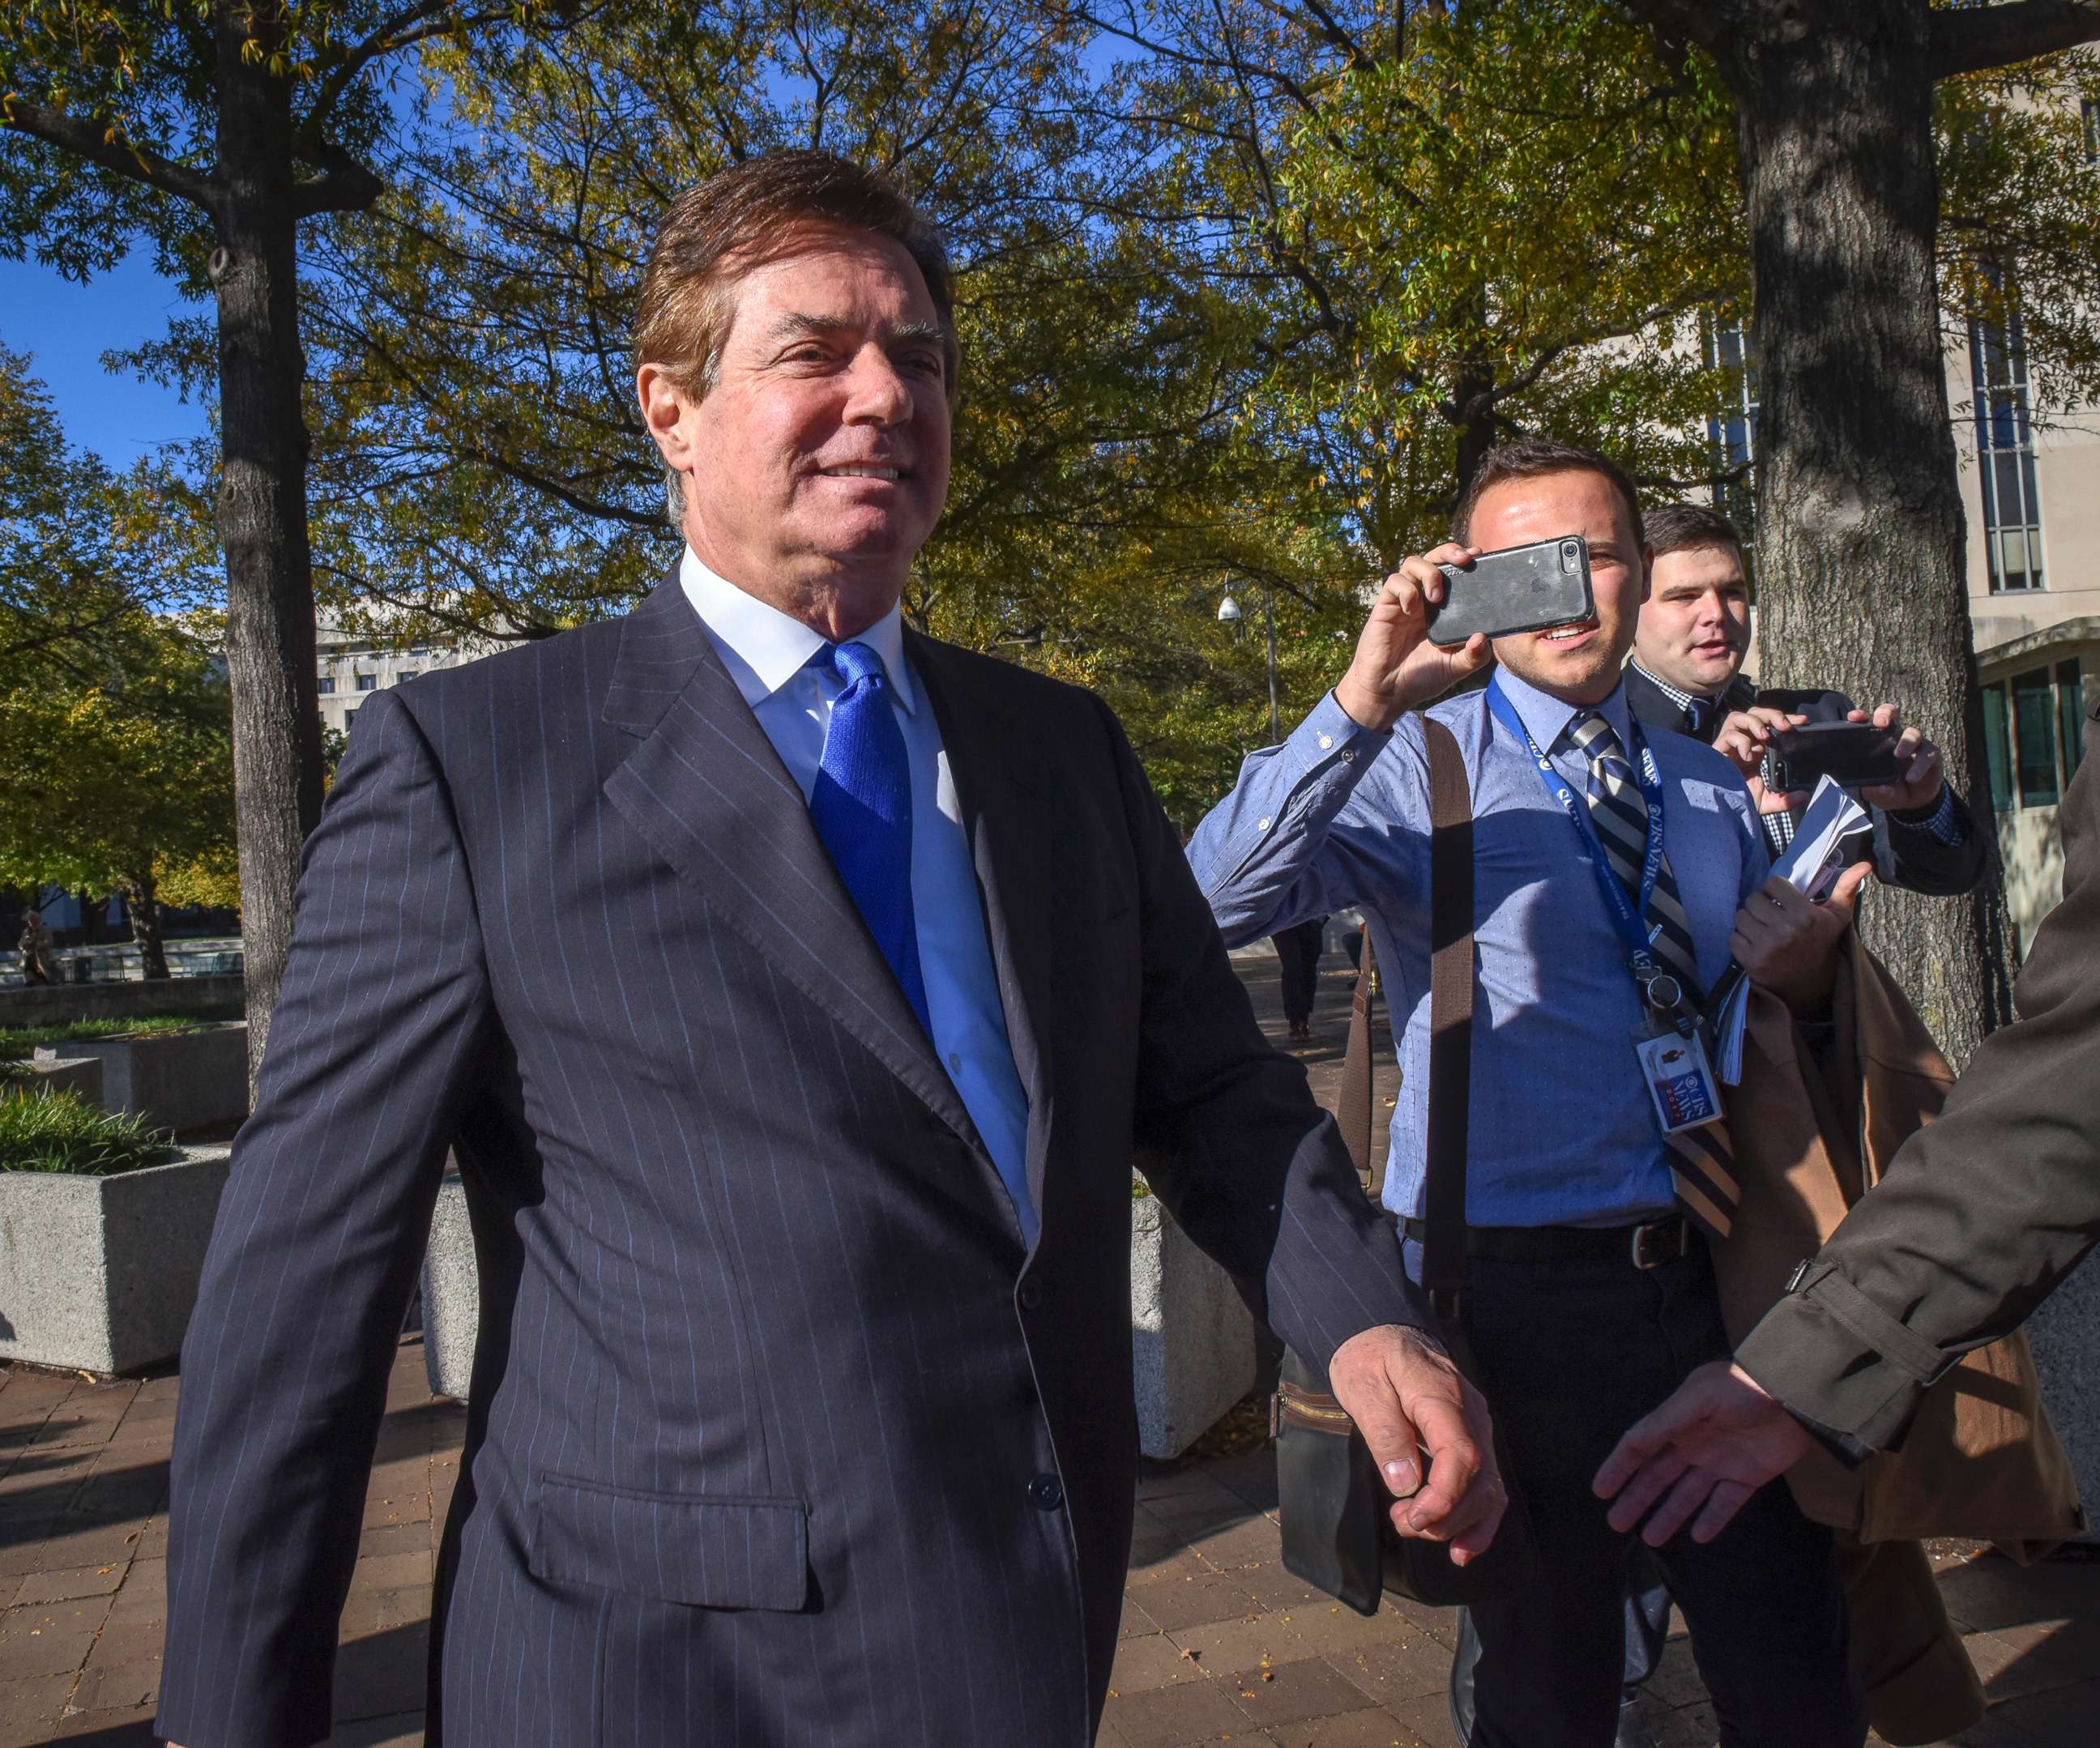 PHOTO: President Trumps former campaign manager Paul Manafort, departs US District Court on October, 30, 2017 in Washington, DC.